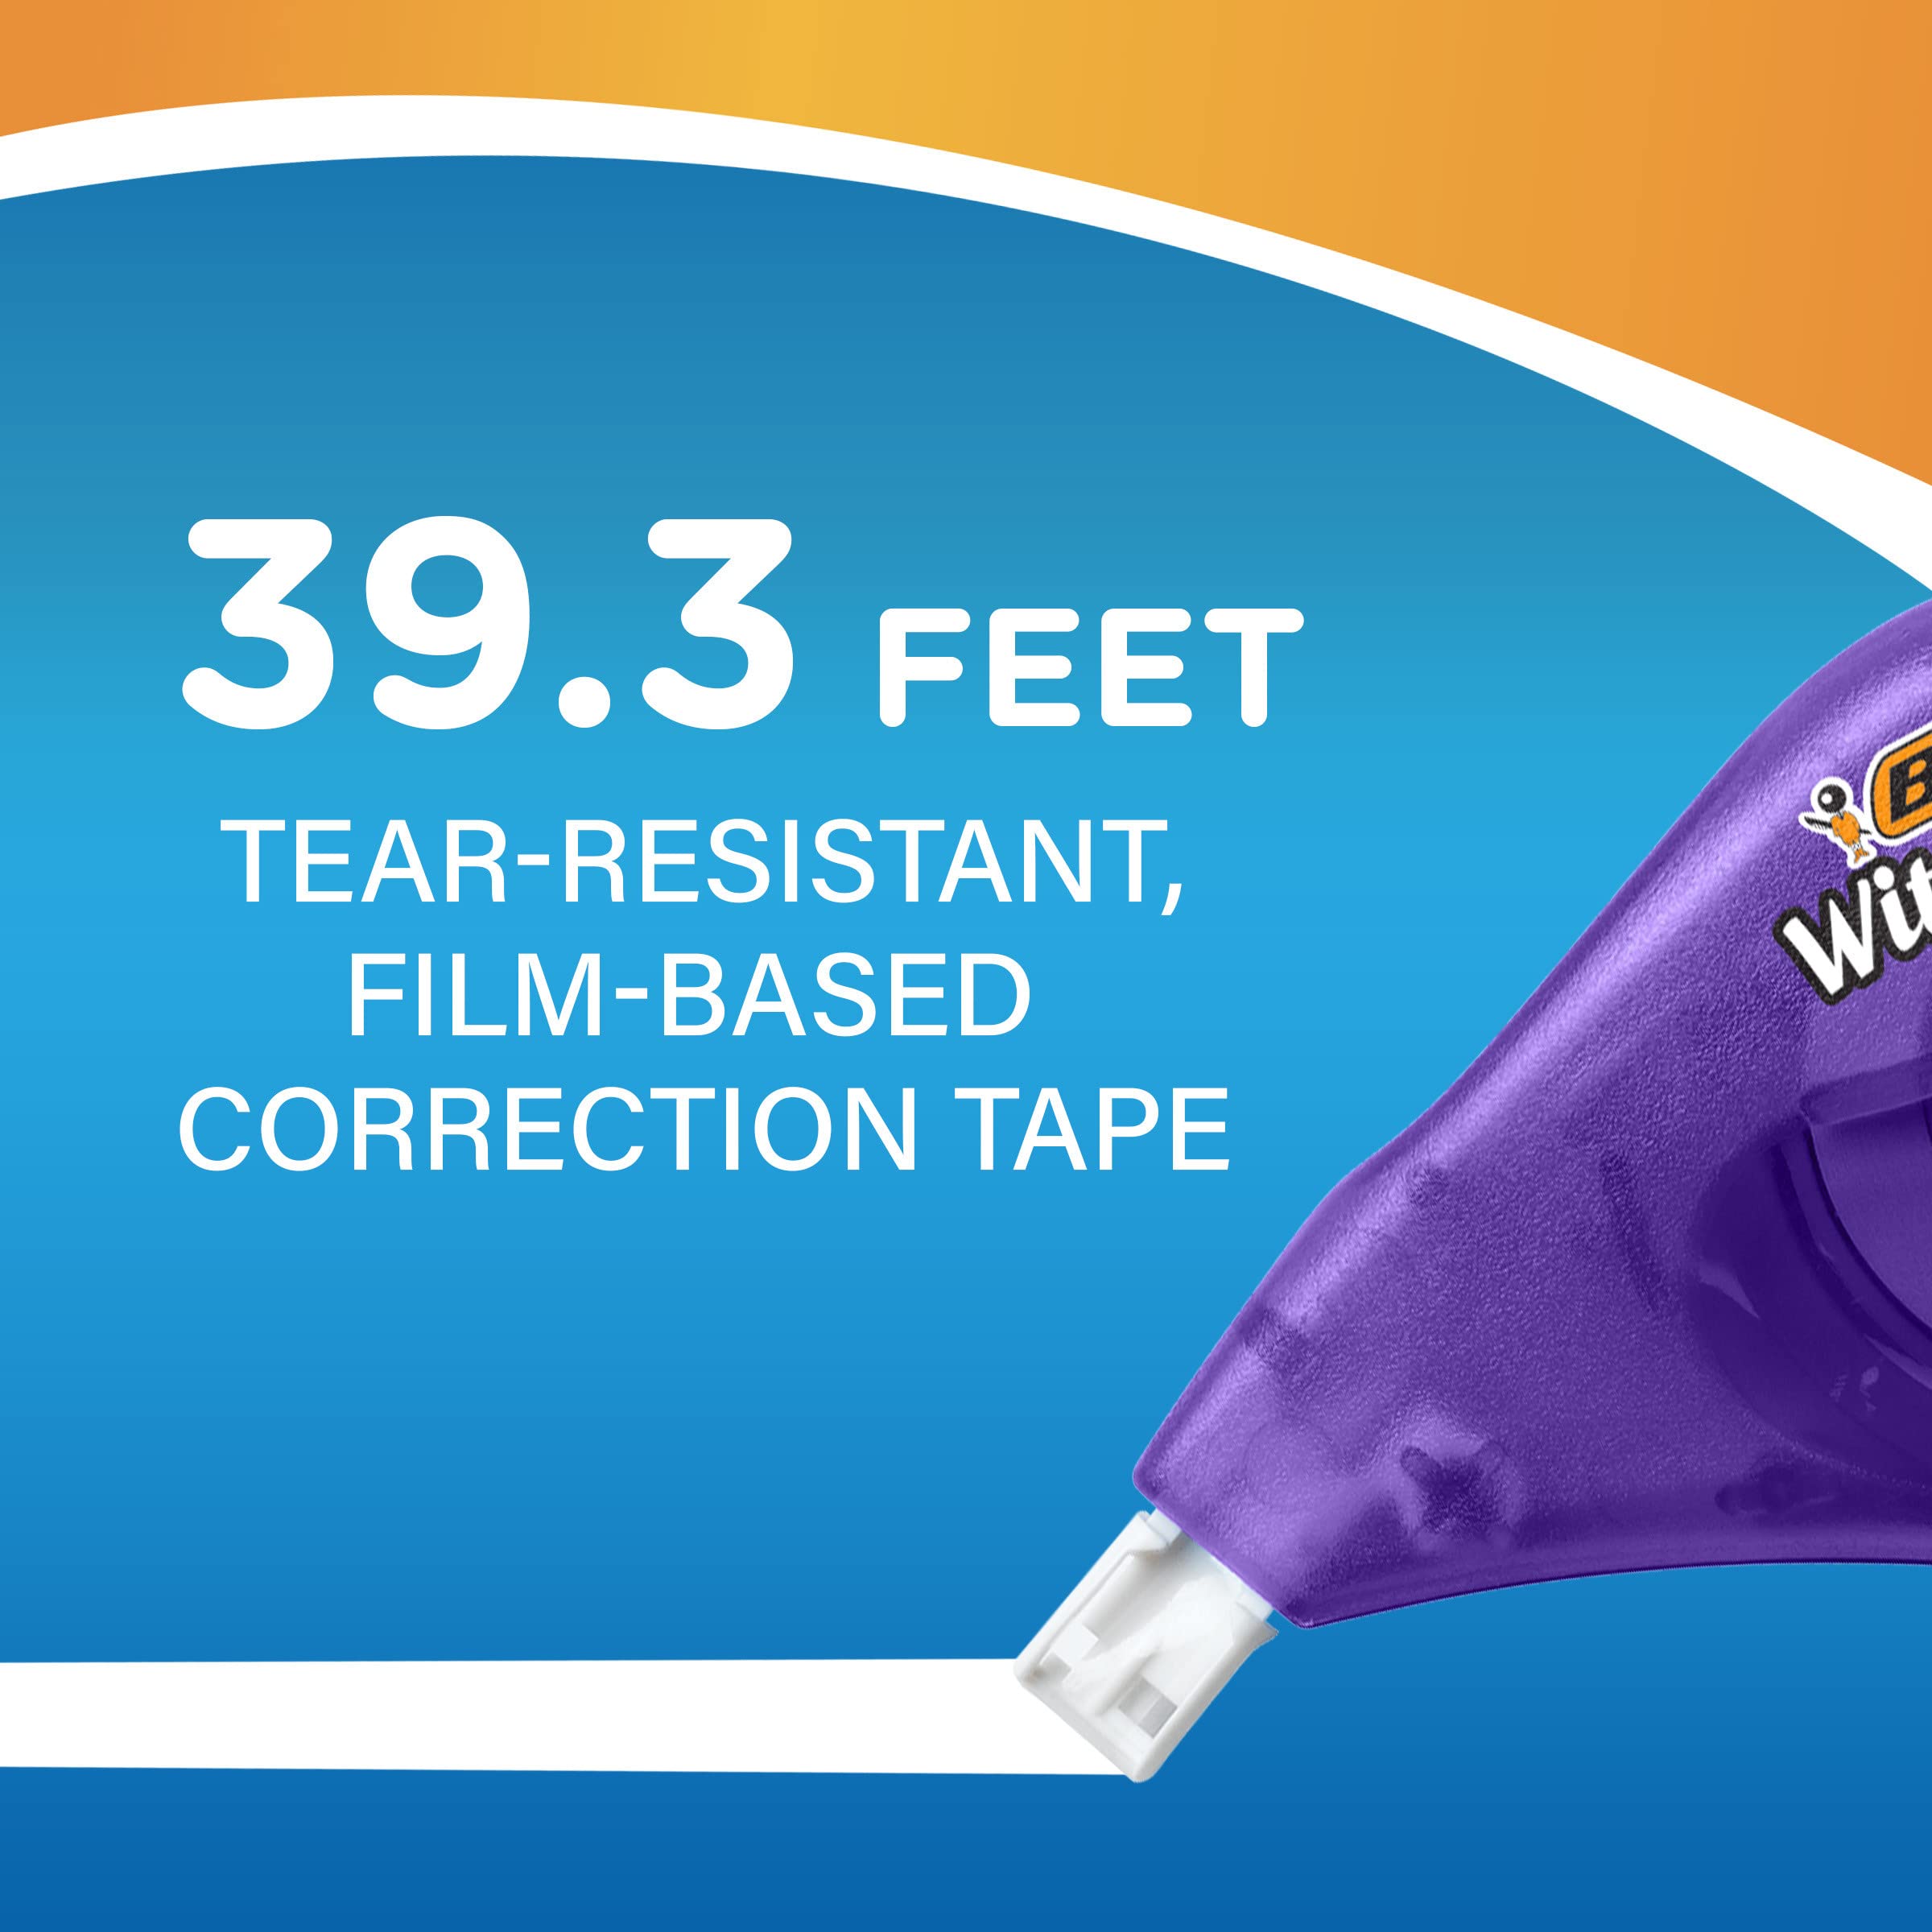 BIC Wite-Out Brand EZ Correct Correction Tape, 19.8 Feet, 18-Count Pack of white Correction Tape, Fast, Clean and Easy to Use Tear-Resistant Tape Office or School Supplies